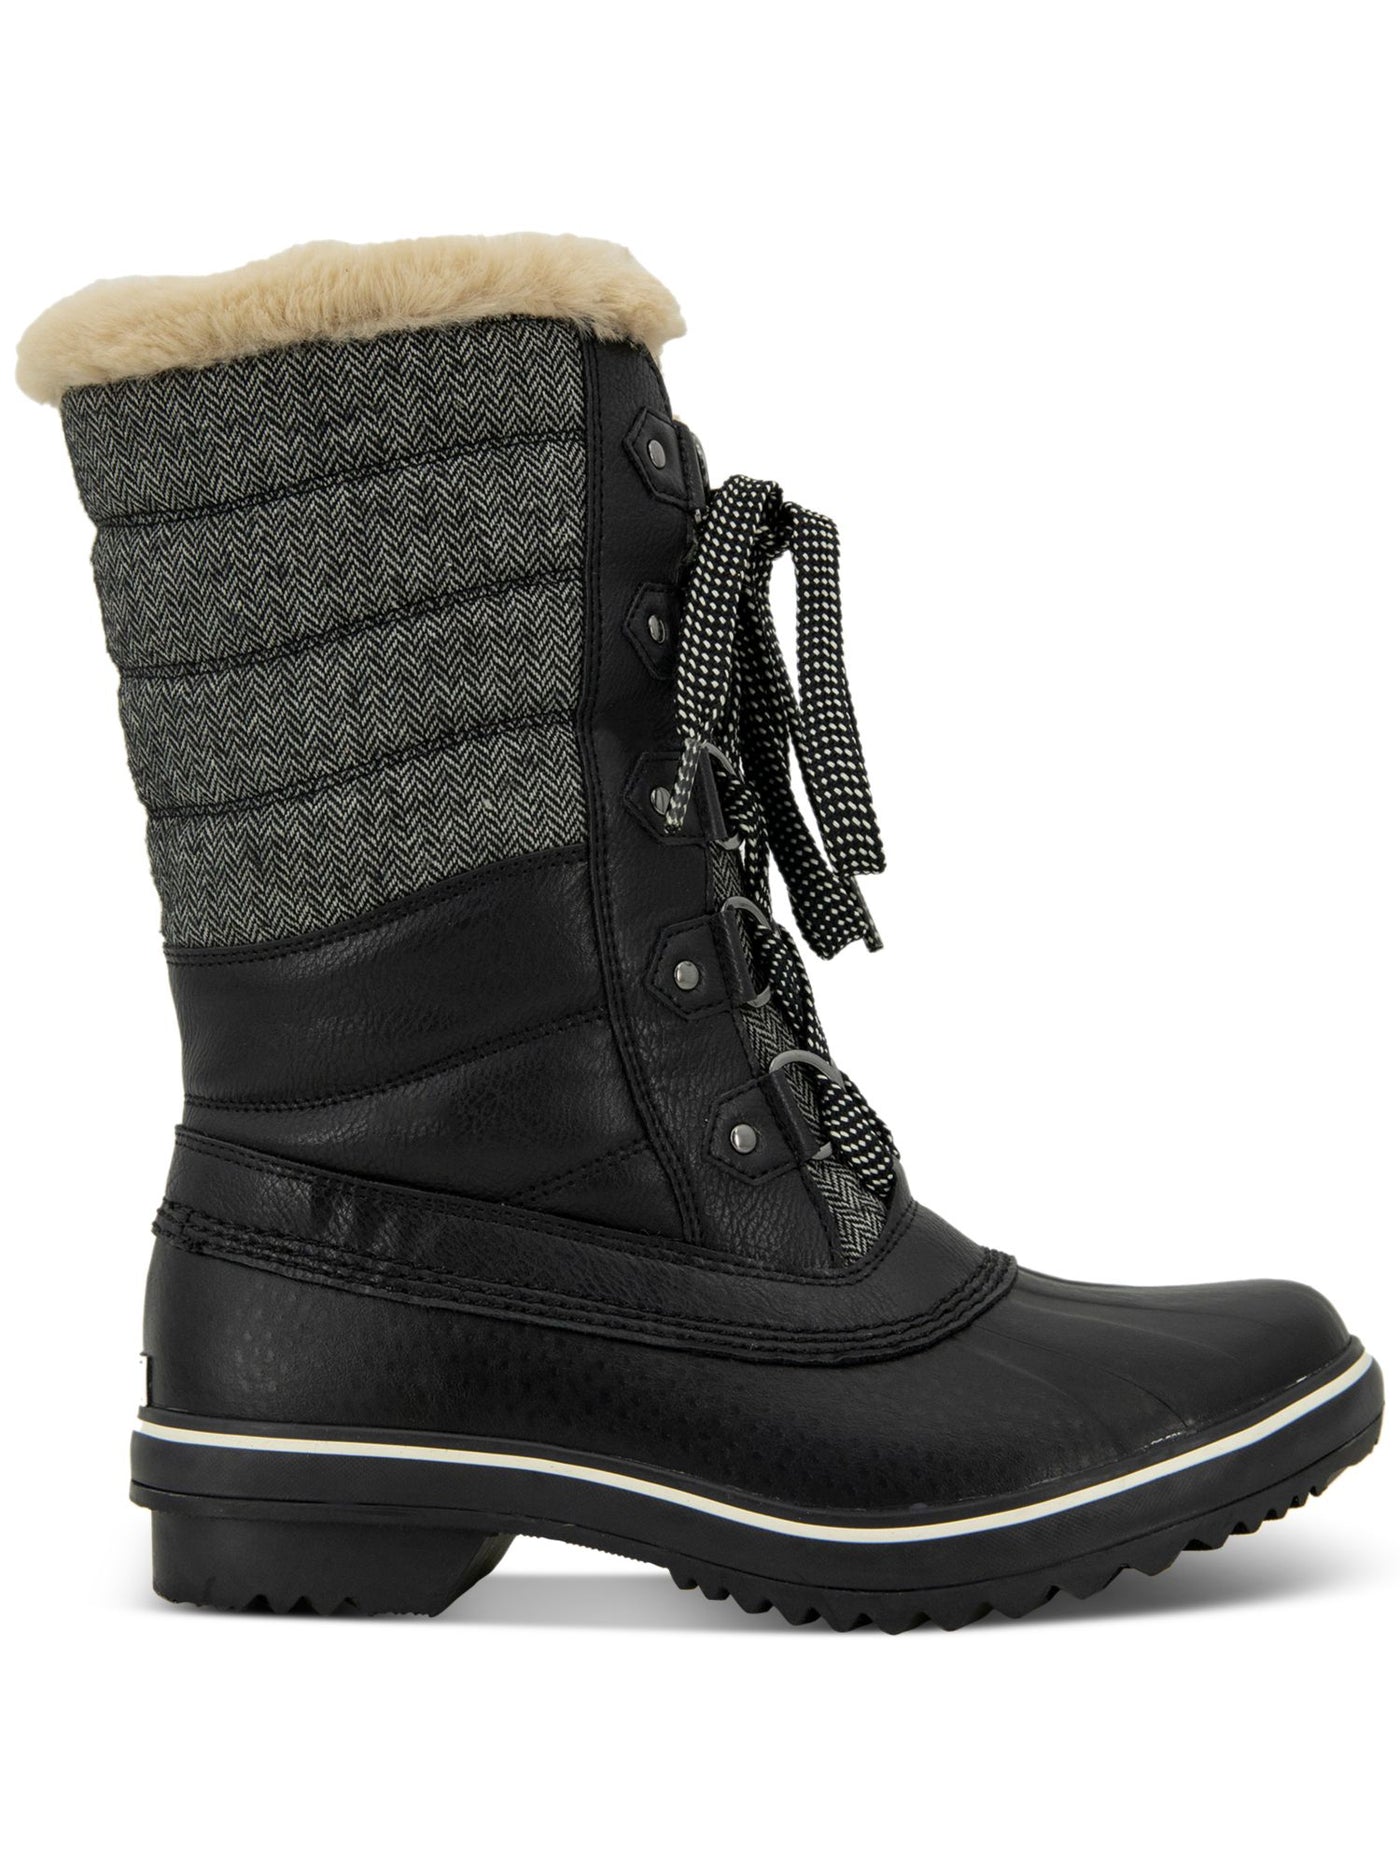 JBU BY JAMBU Womens Black Water Resistant Quilted Siberia Round Toe Lace-Up Winter 8.5 M